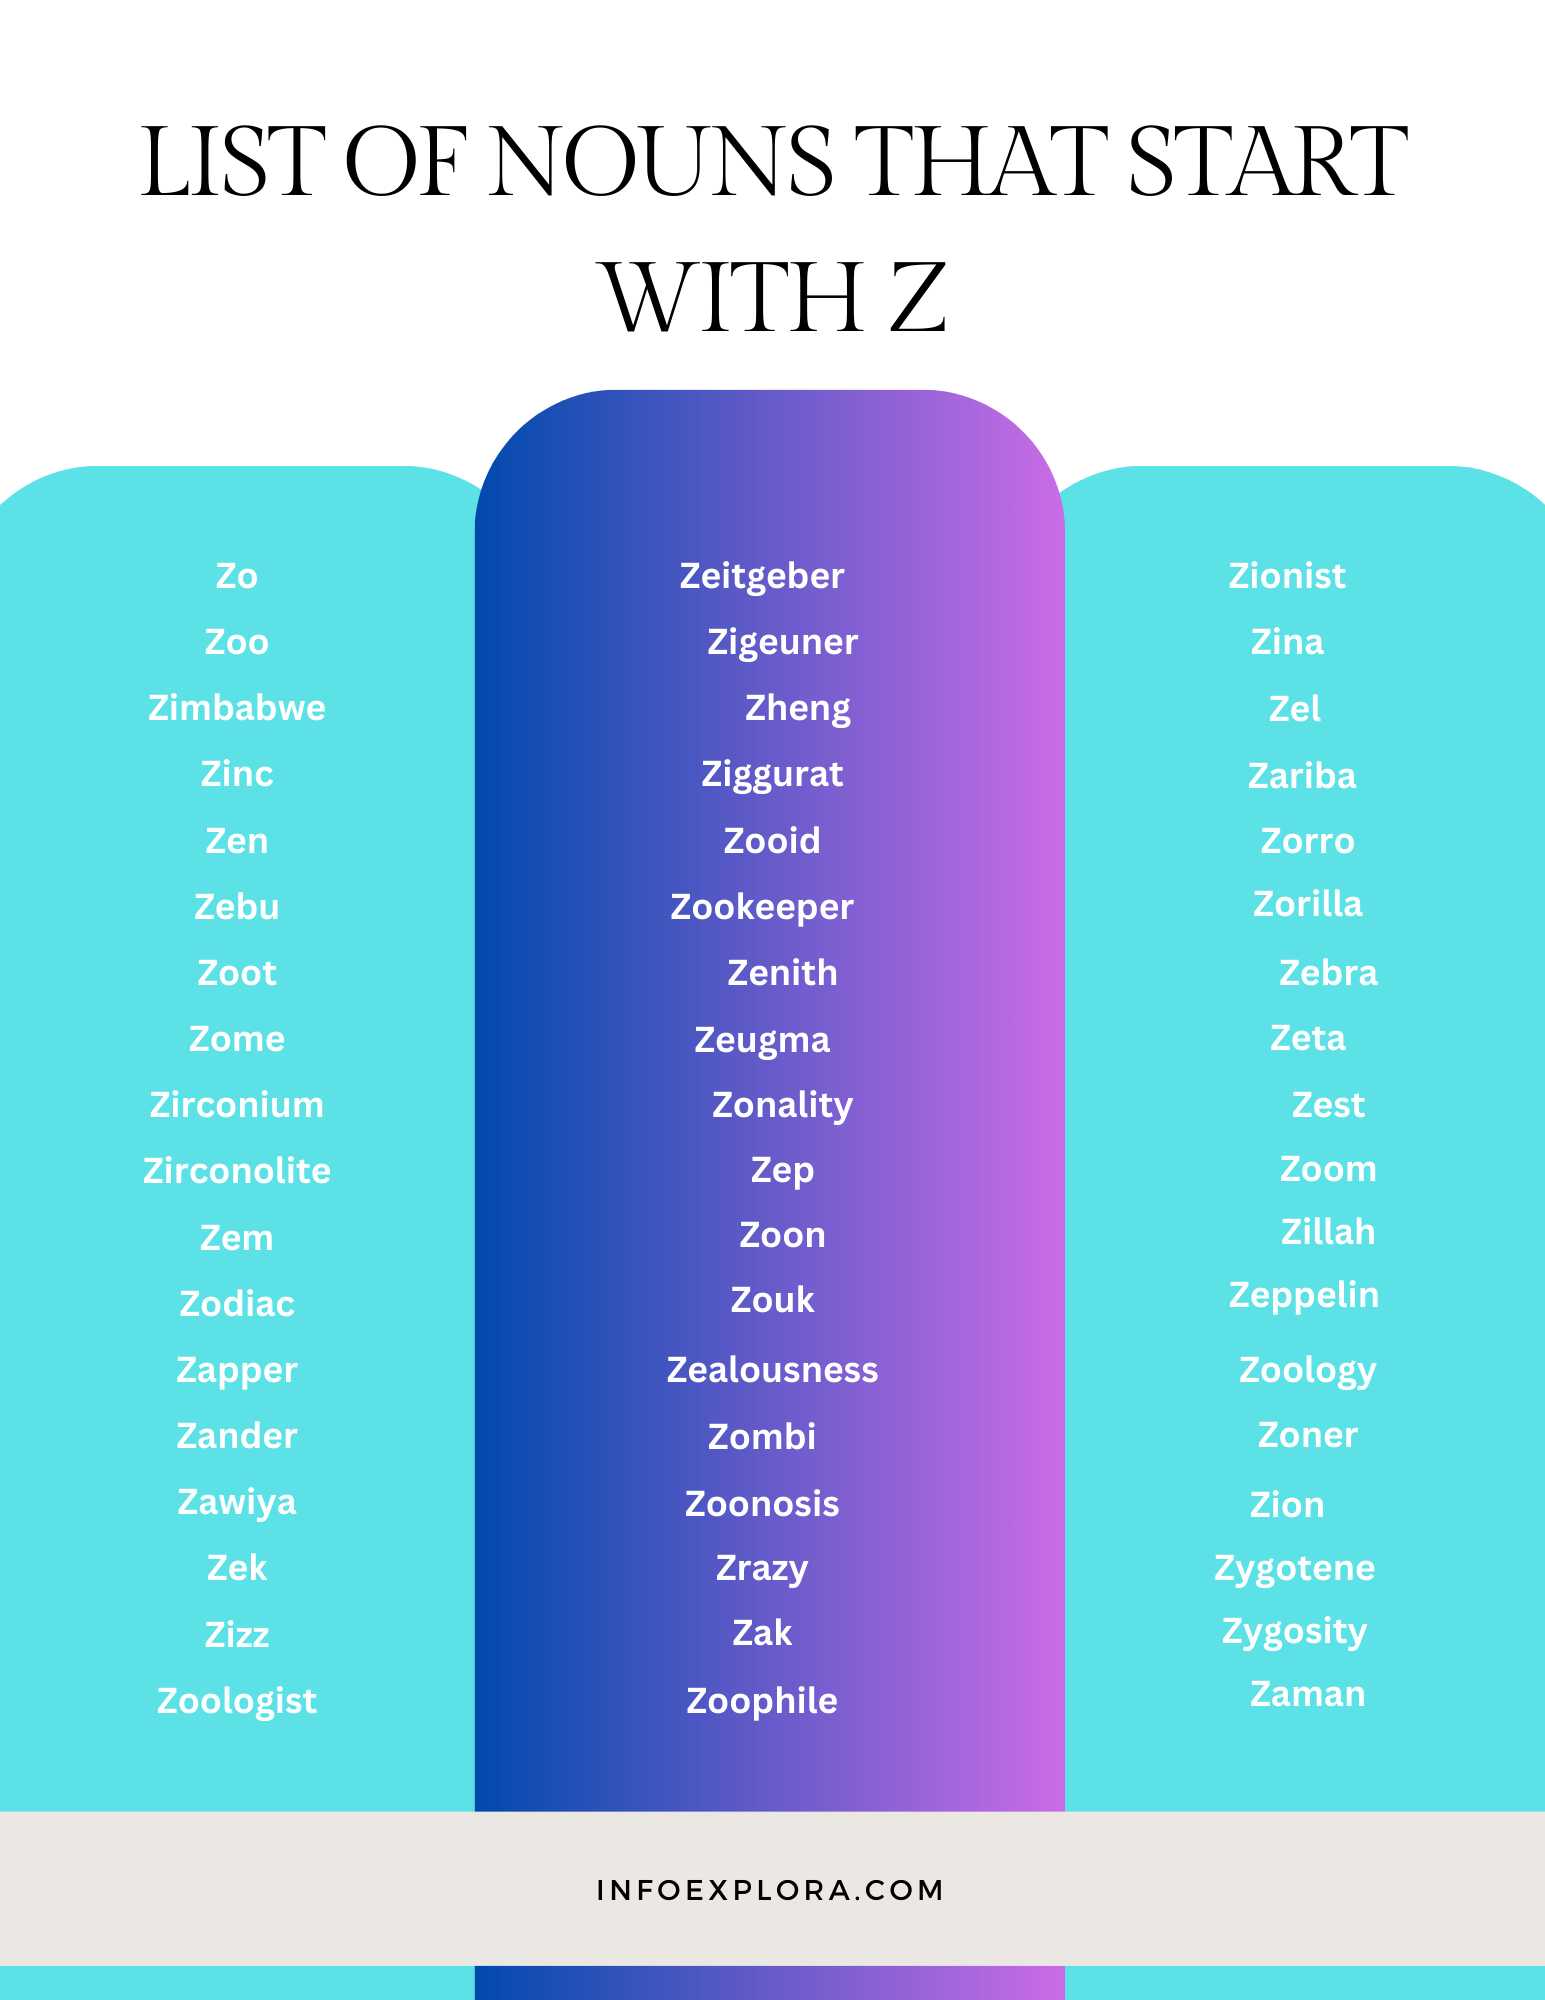 List of Nouns that Start With Z